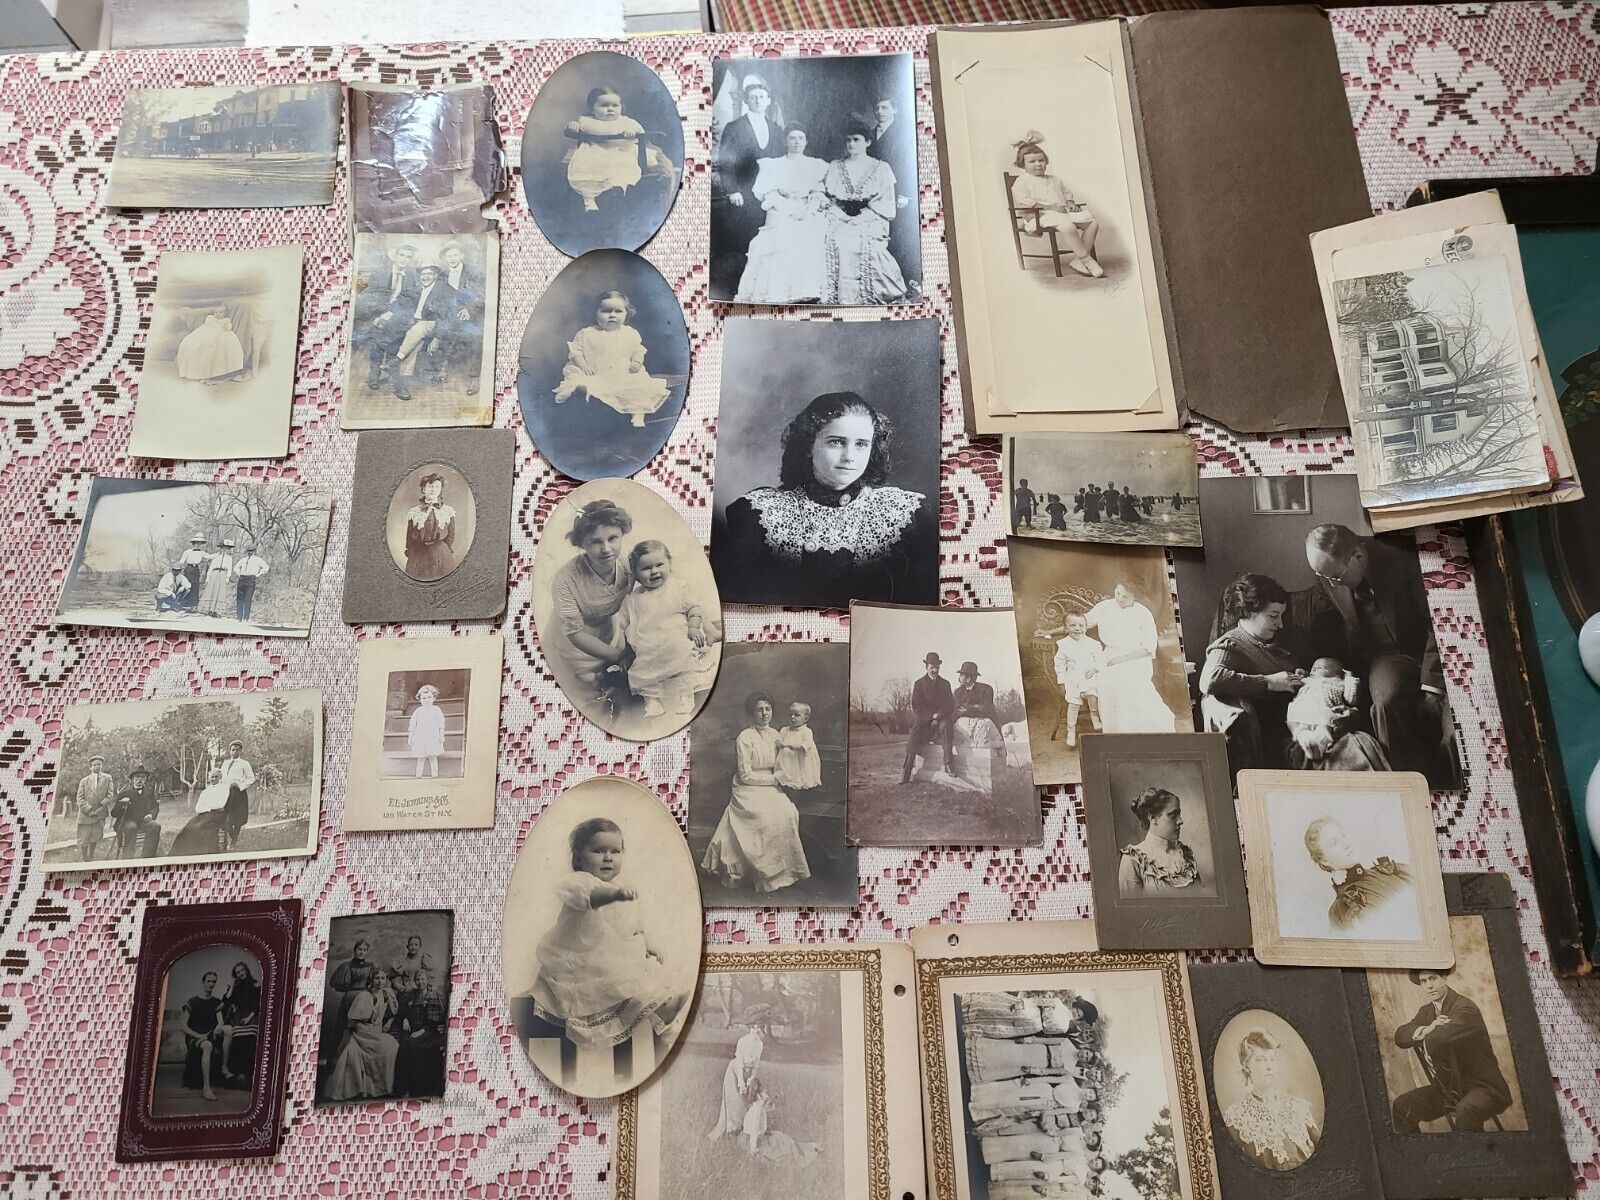 2 ANTIQUE TIN TYPE PHOTOGRAPHS+ 27 1800's Early 1900's Photos. Only 1 Damaged 